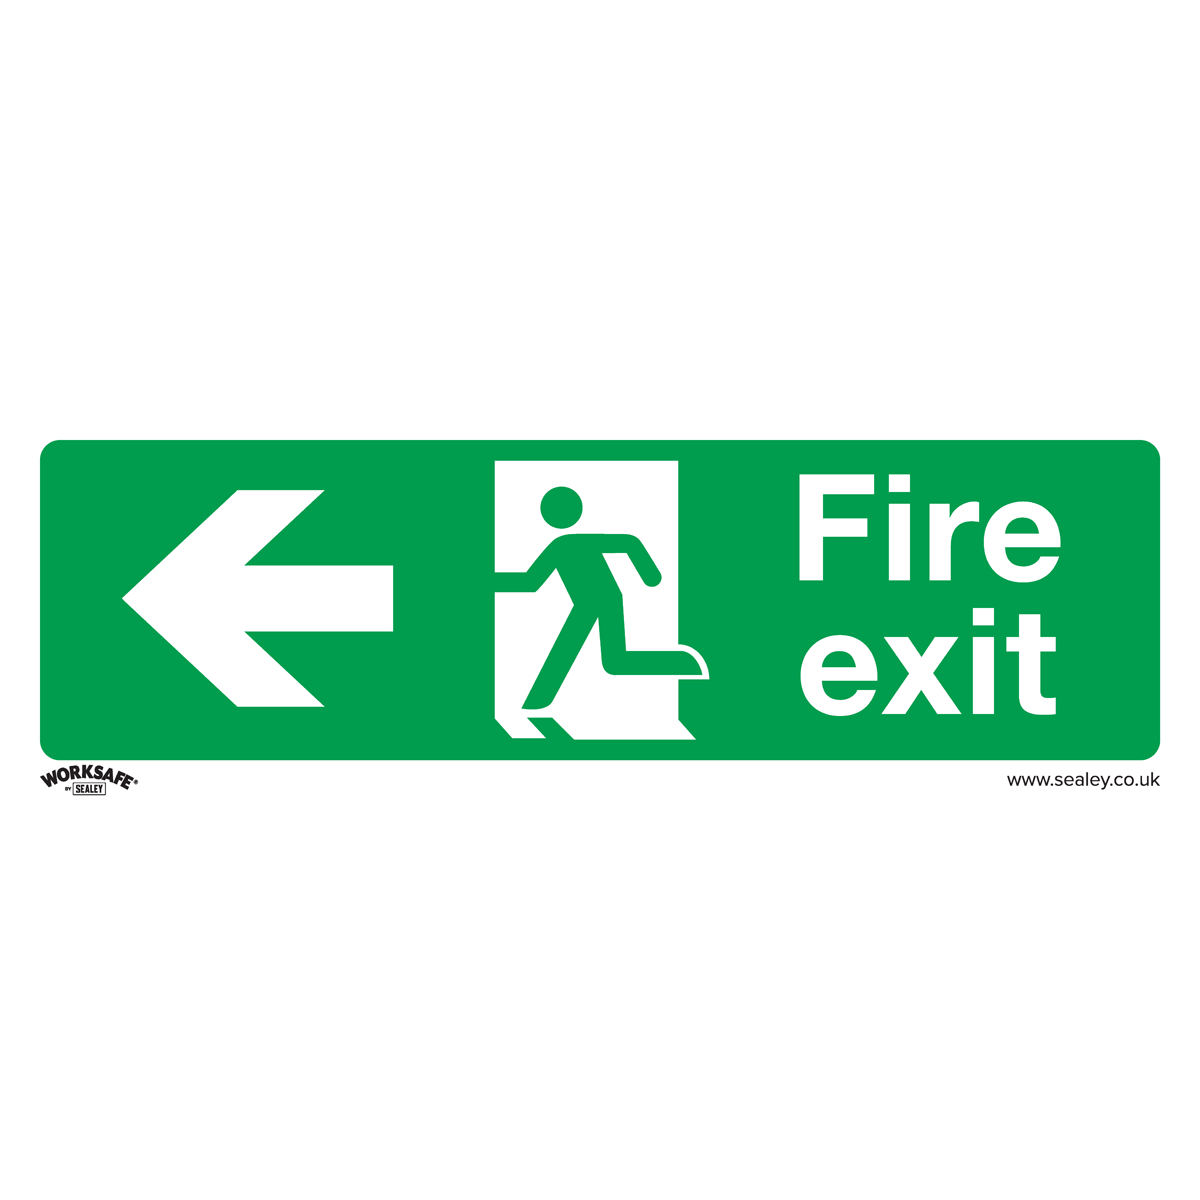 Sealey Safe Conditions Safety Sign - Fire Exit (Left) - Self-Adhesive Vinyl